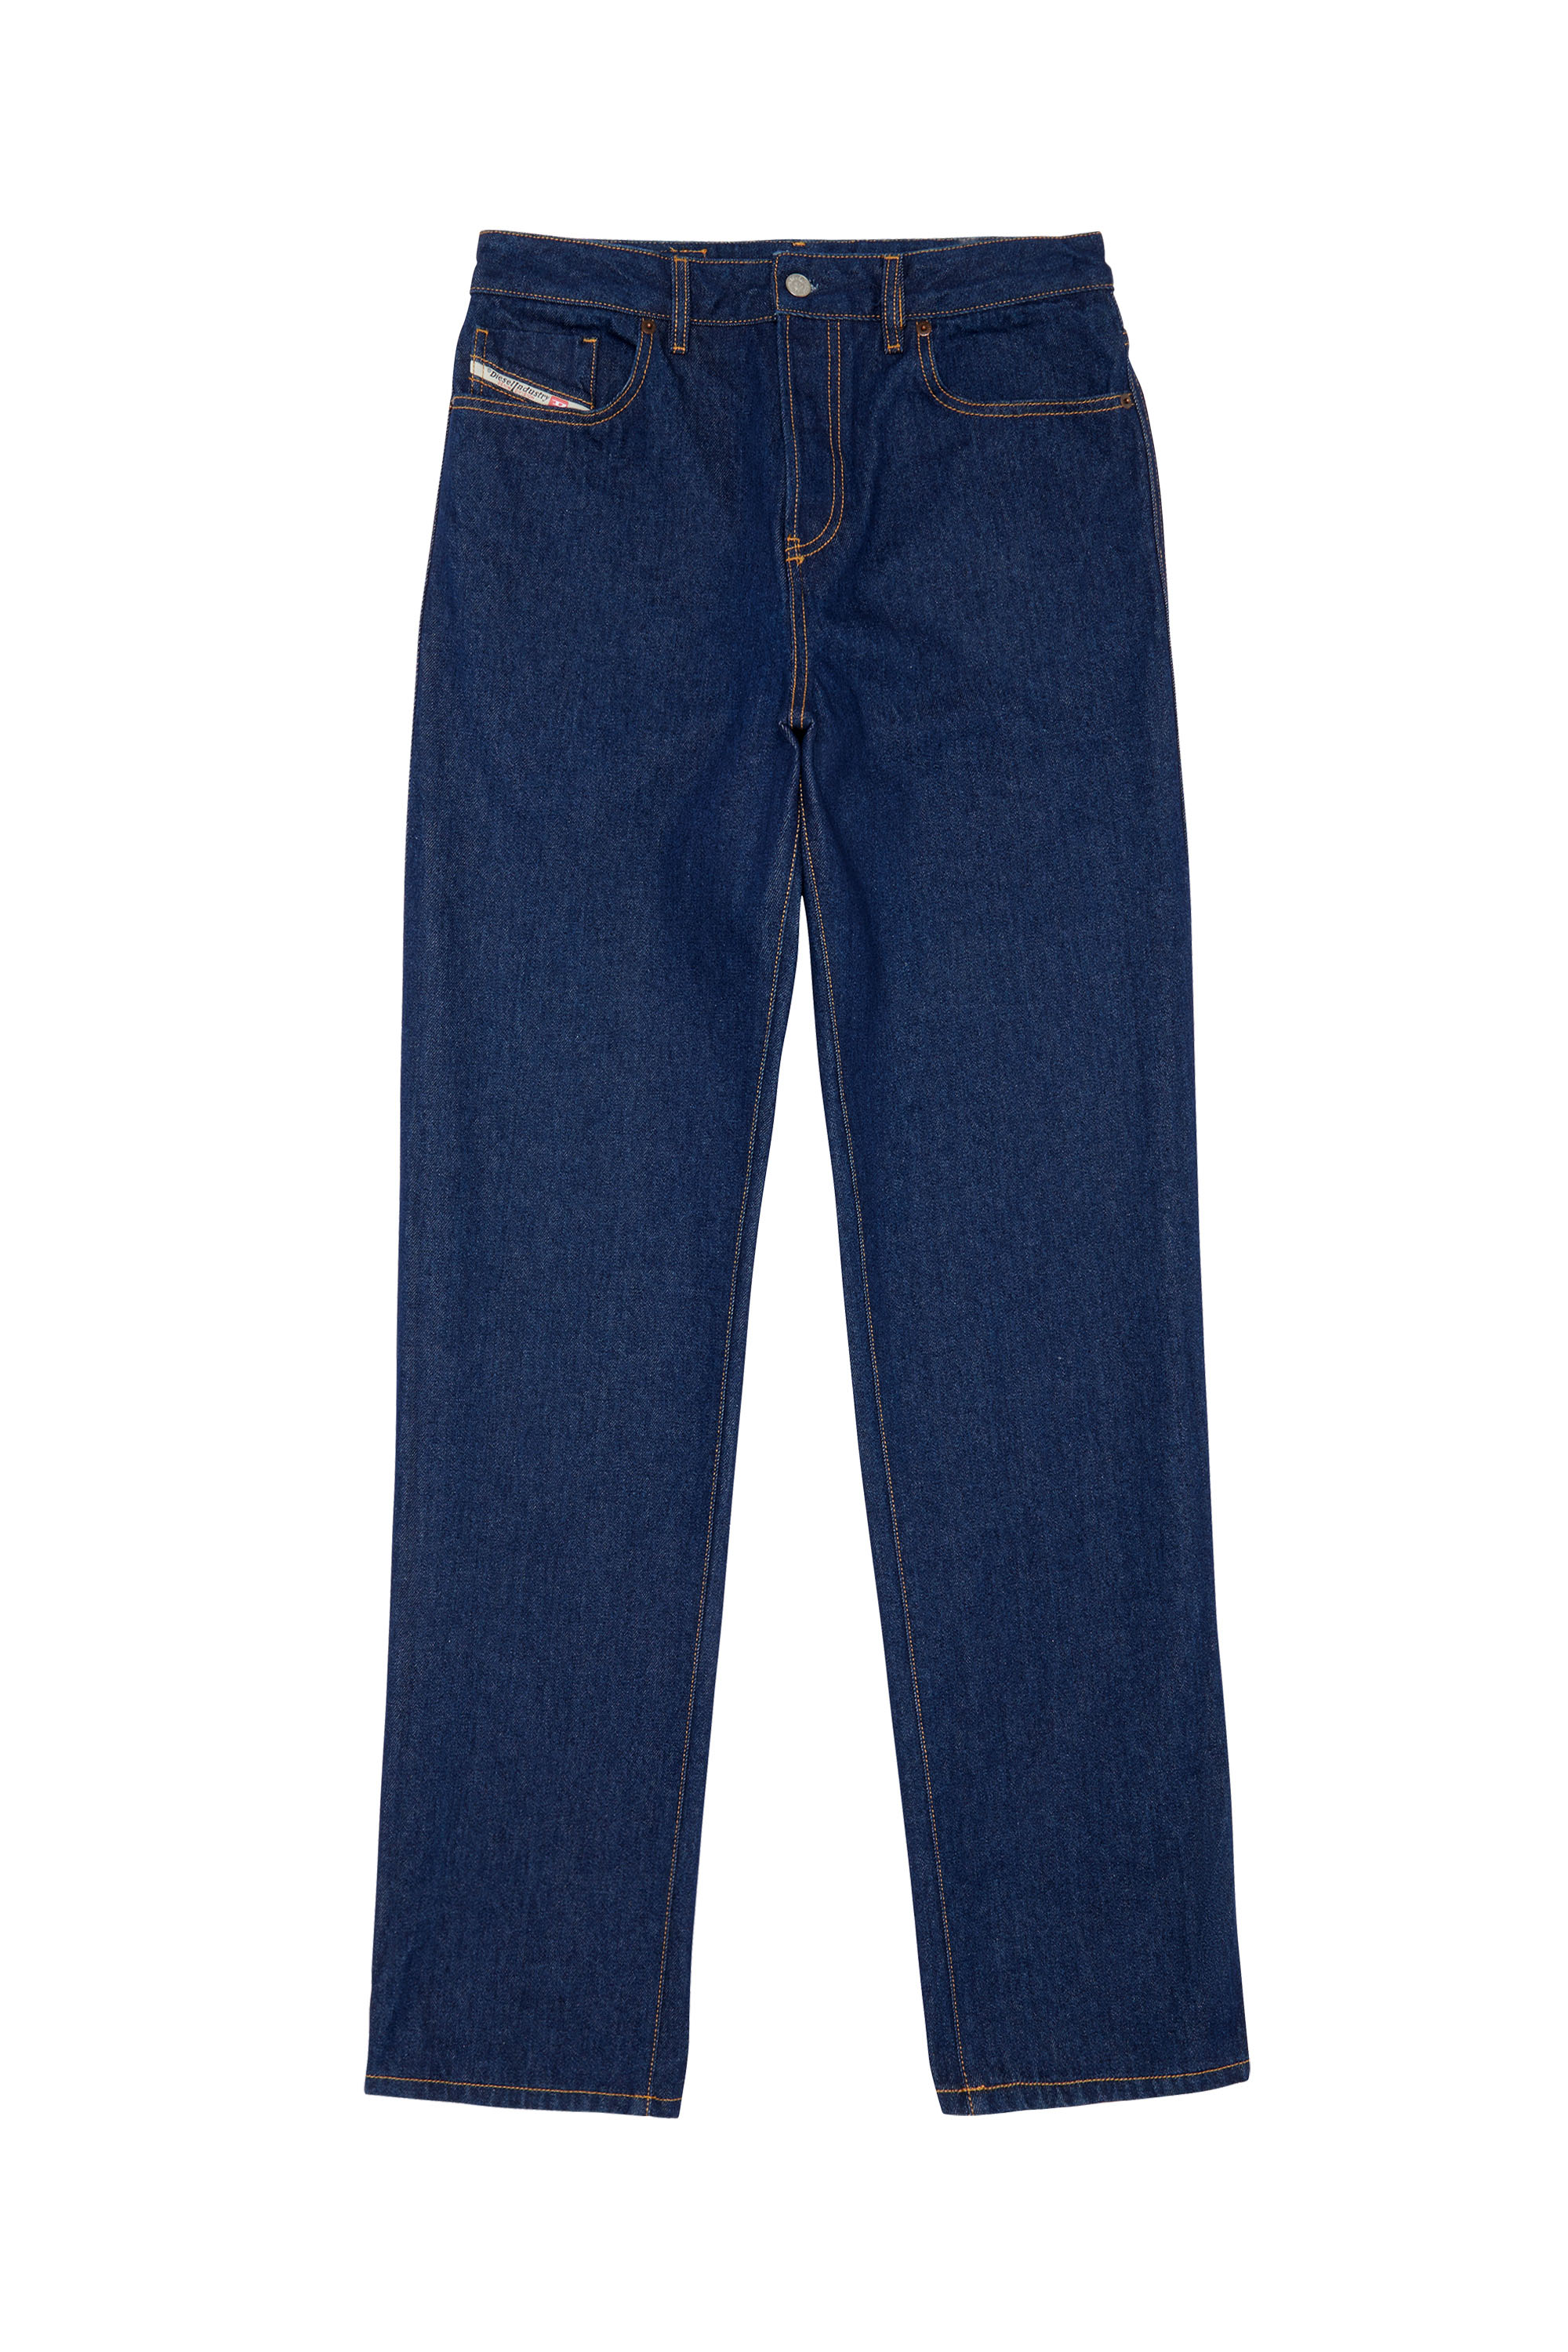 1955 007A5 Straight Jeans, Blu Scuro - Jeans